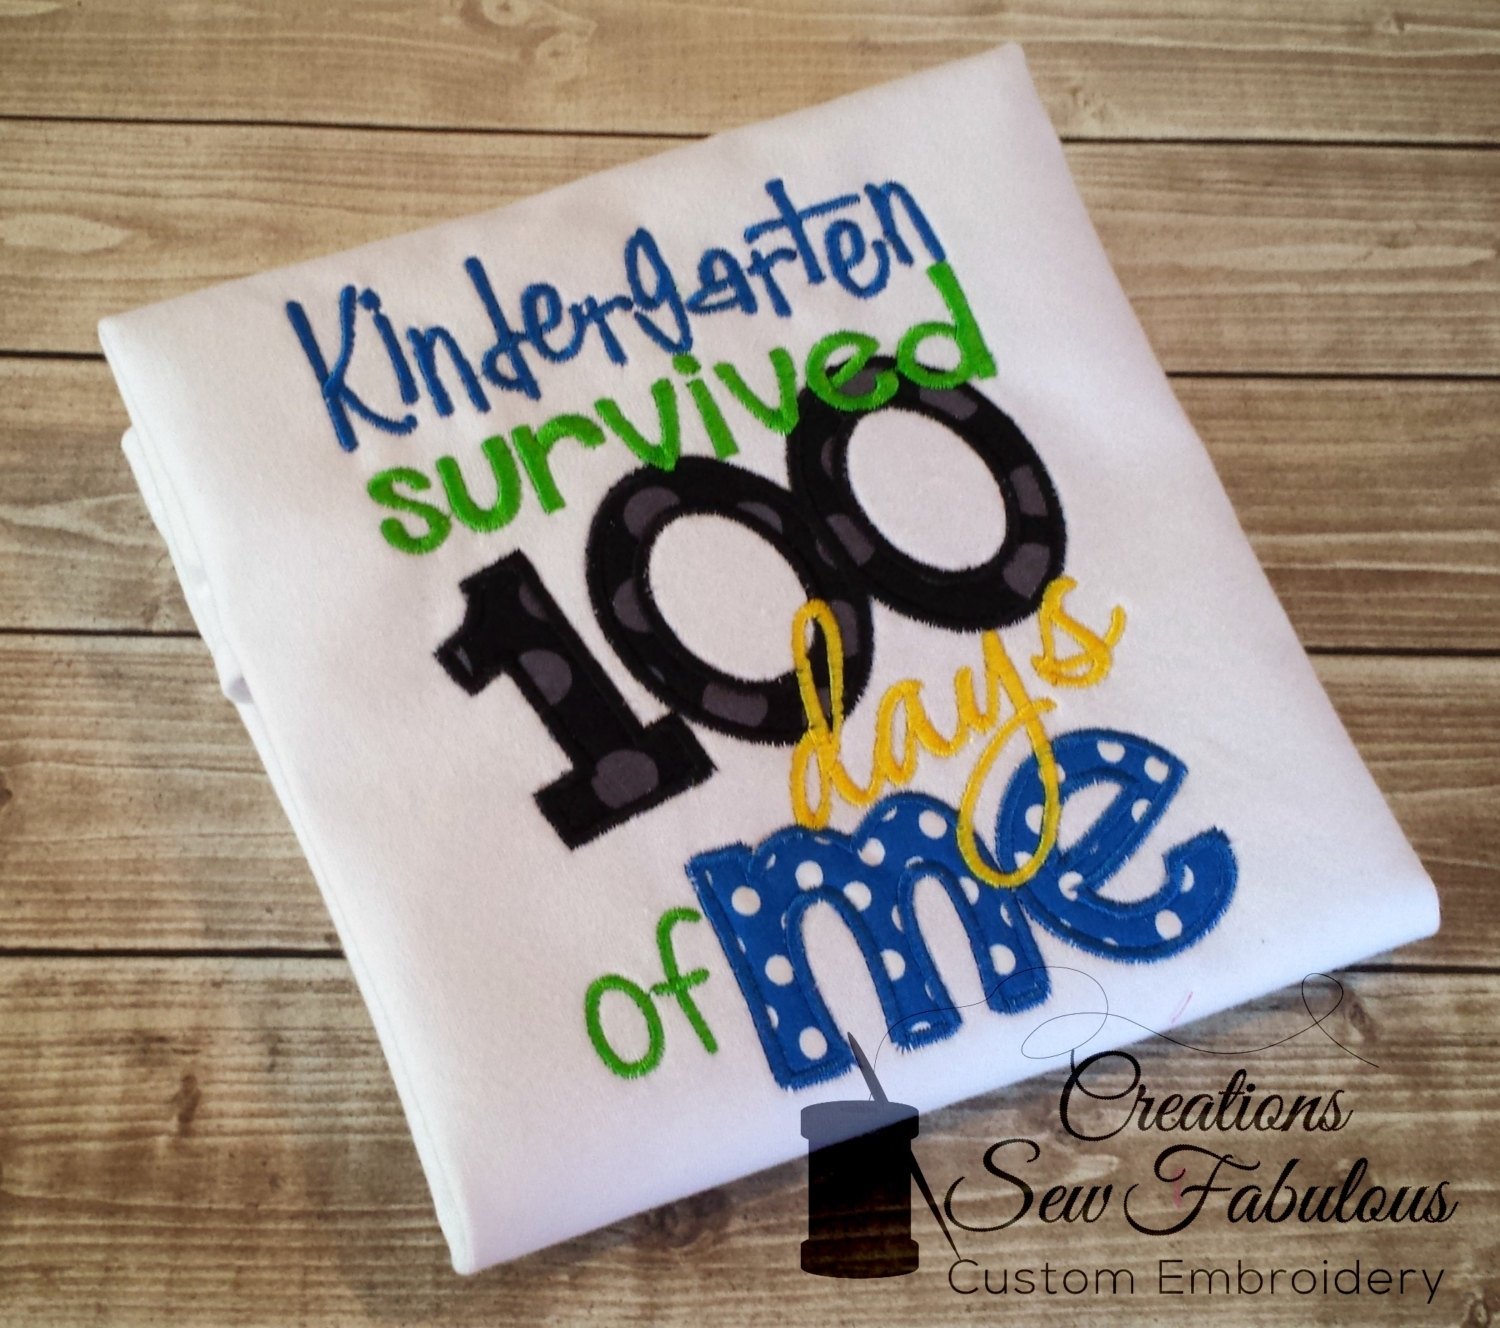 10 Attractive 100Th Day Of School Ideas For Kindergarten 100the day of school shirt ideas google search all things htv 1 2022